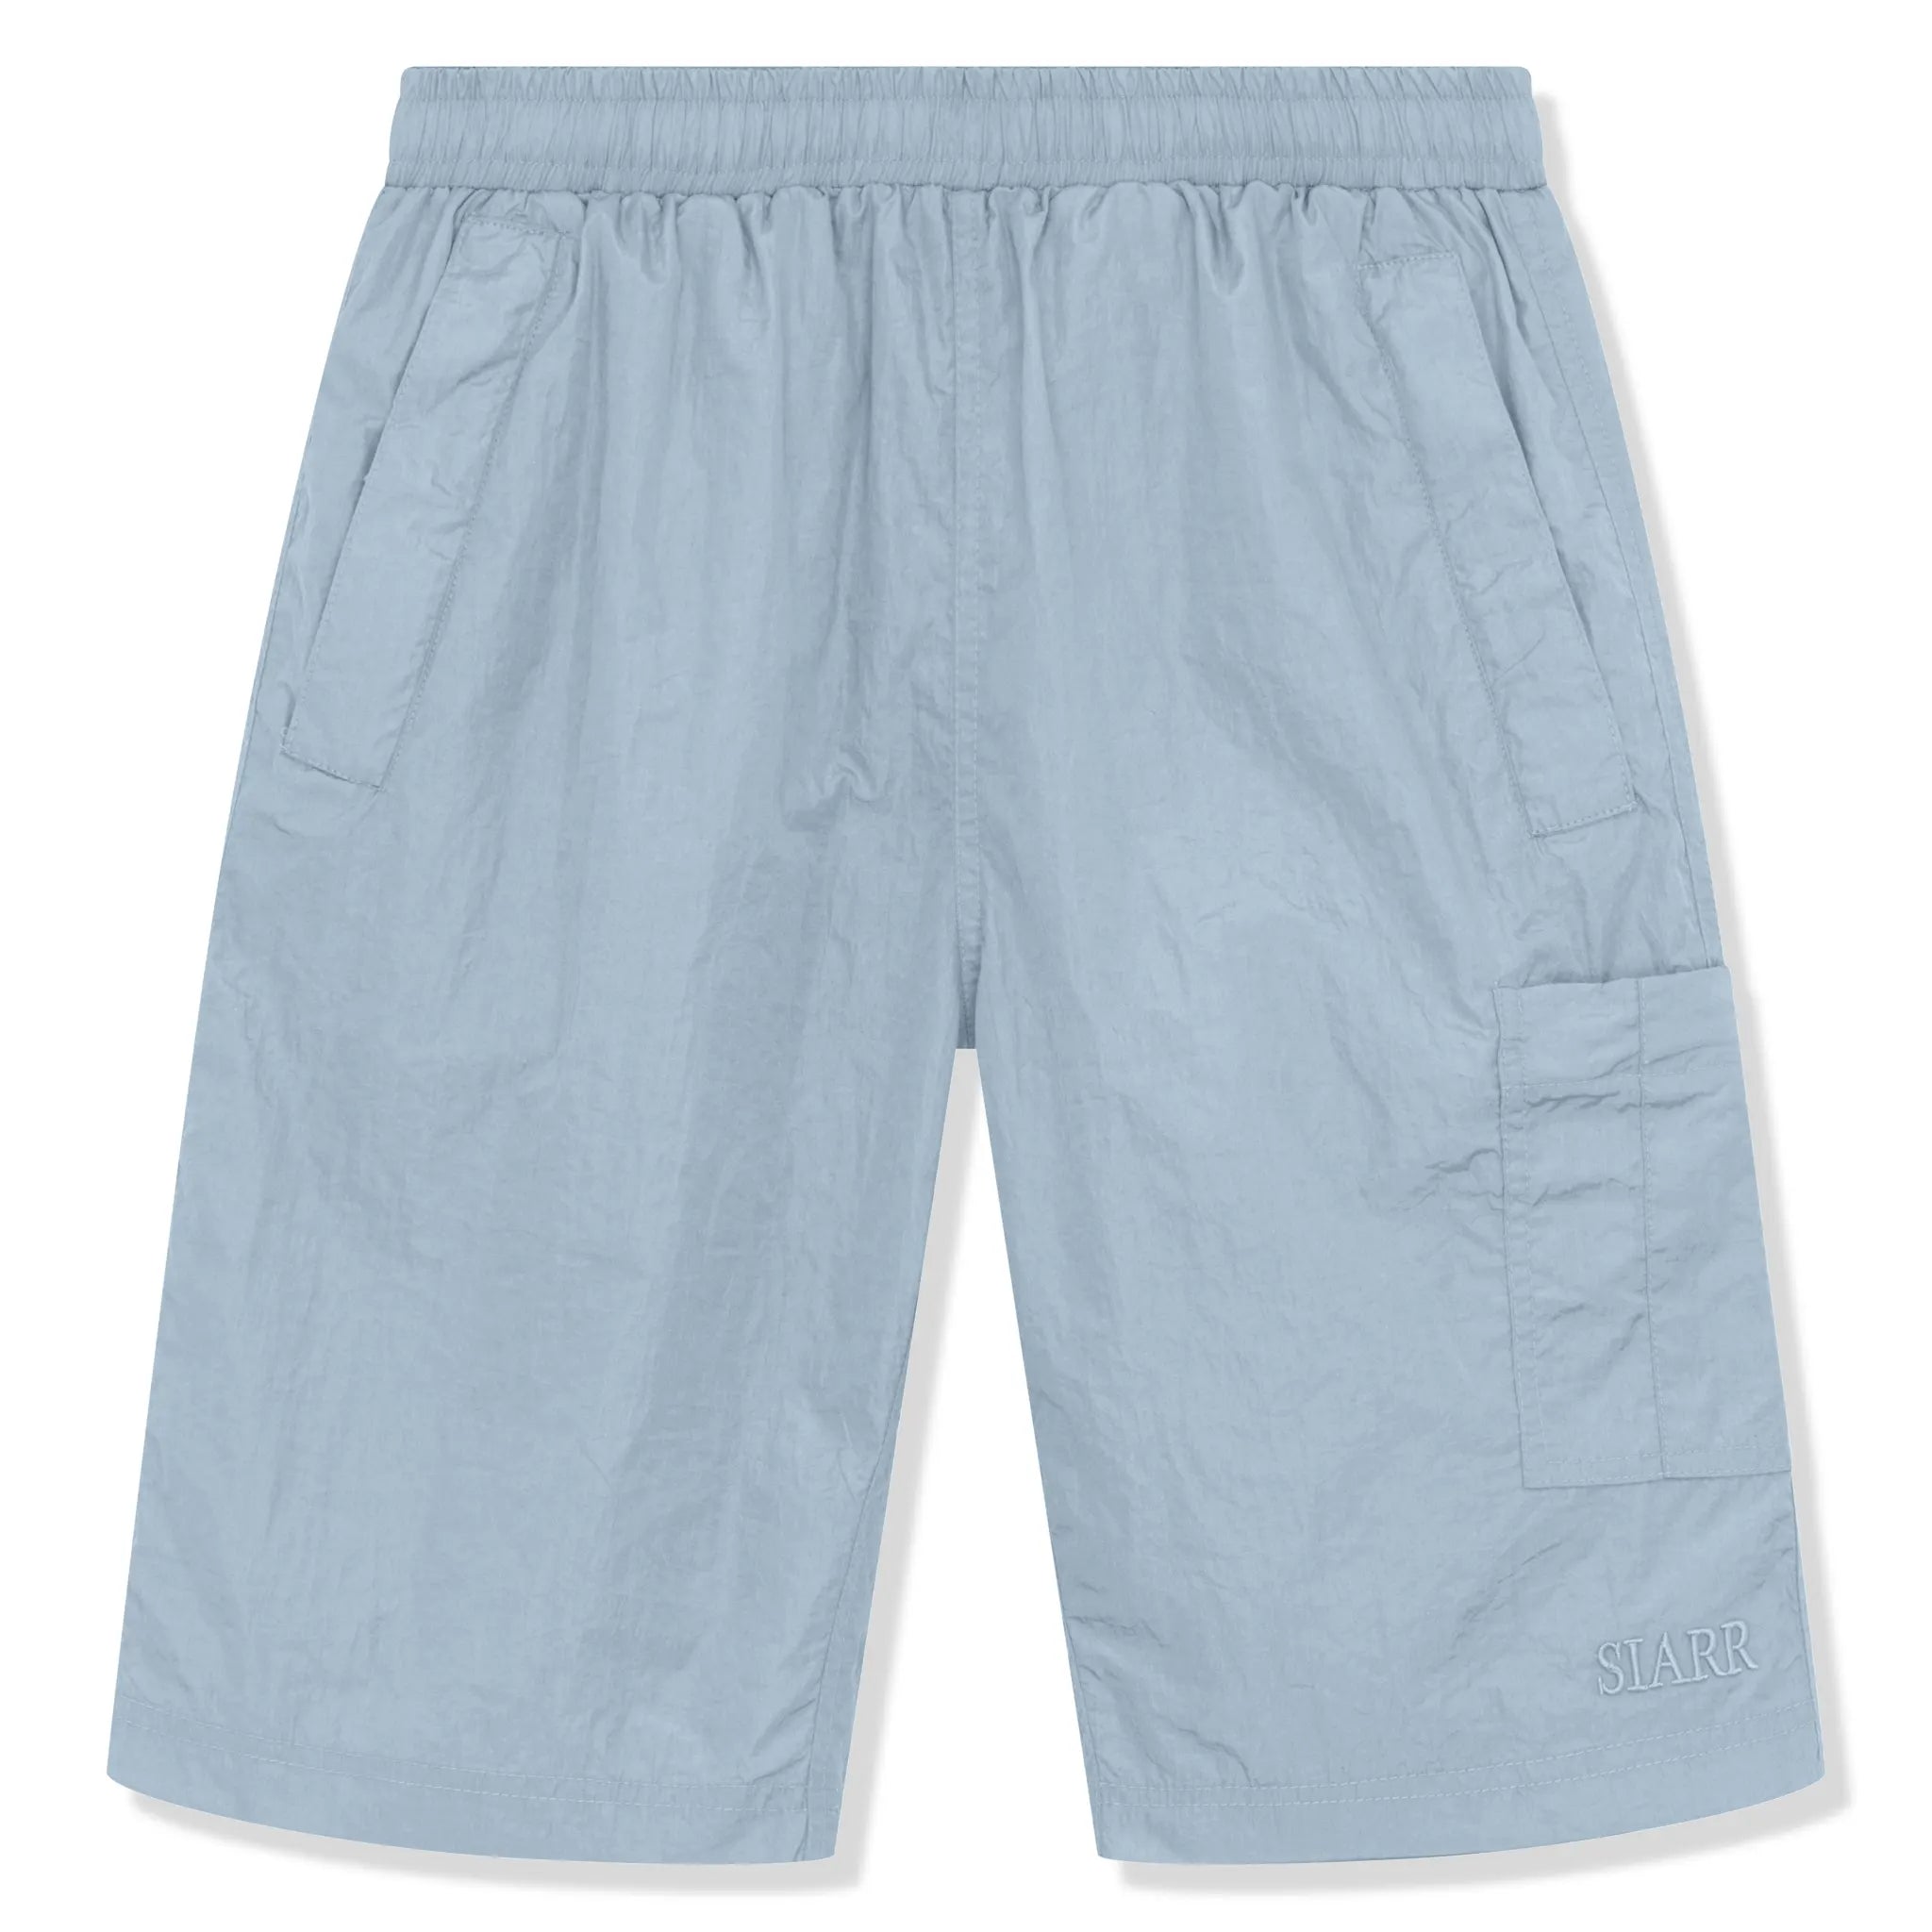 Front view of SIARR Crinkle Baby Blue Shorts